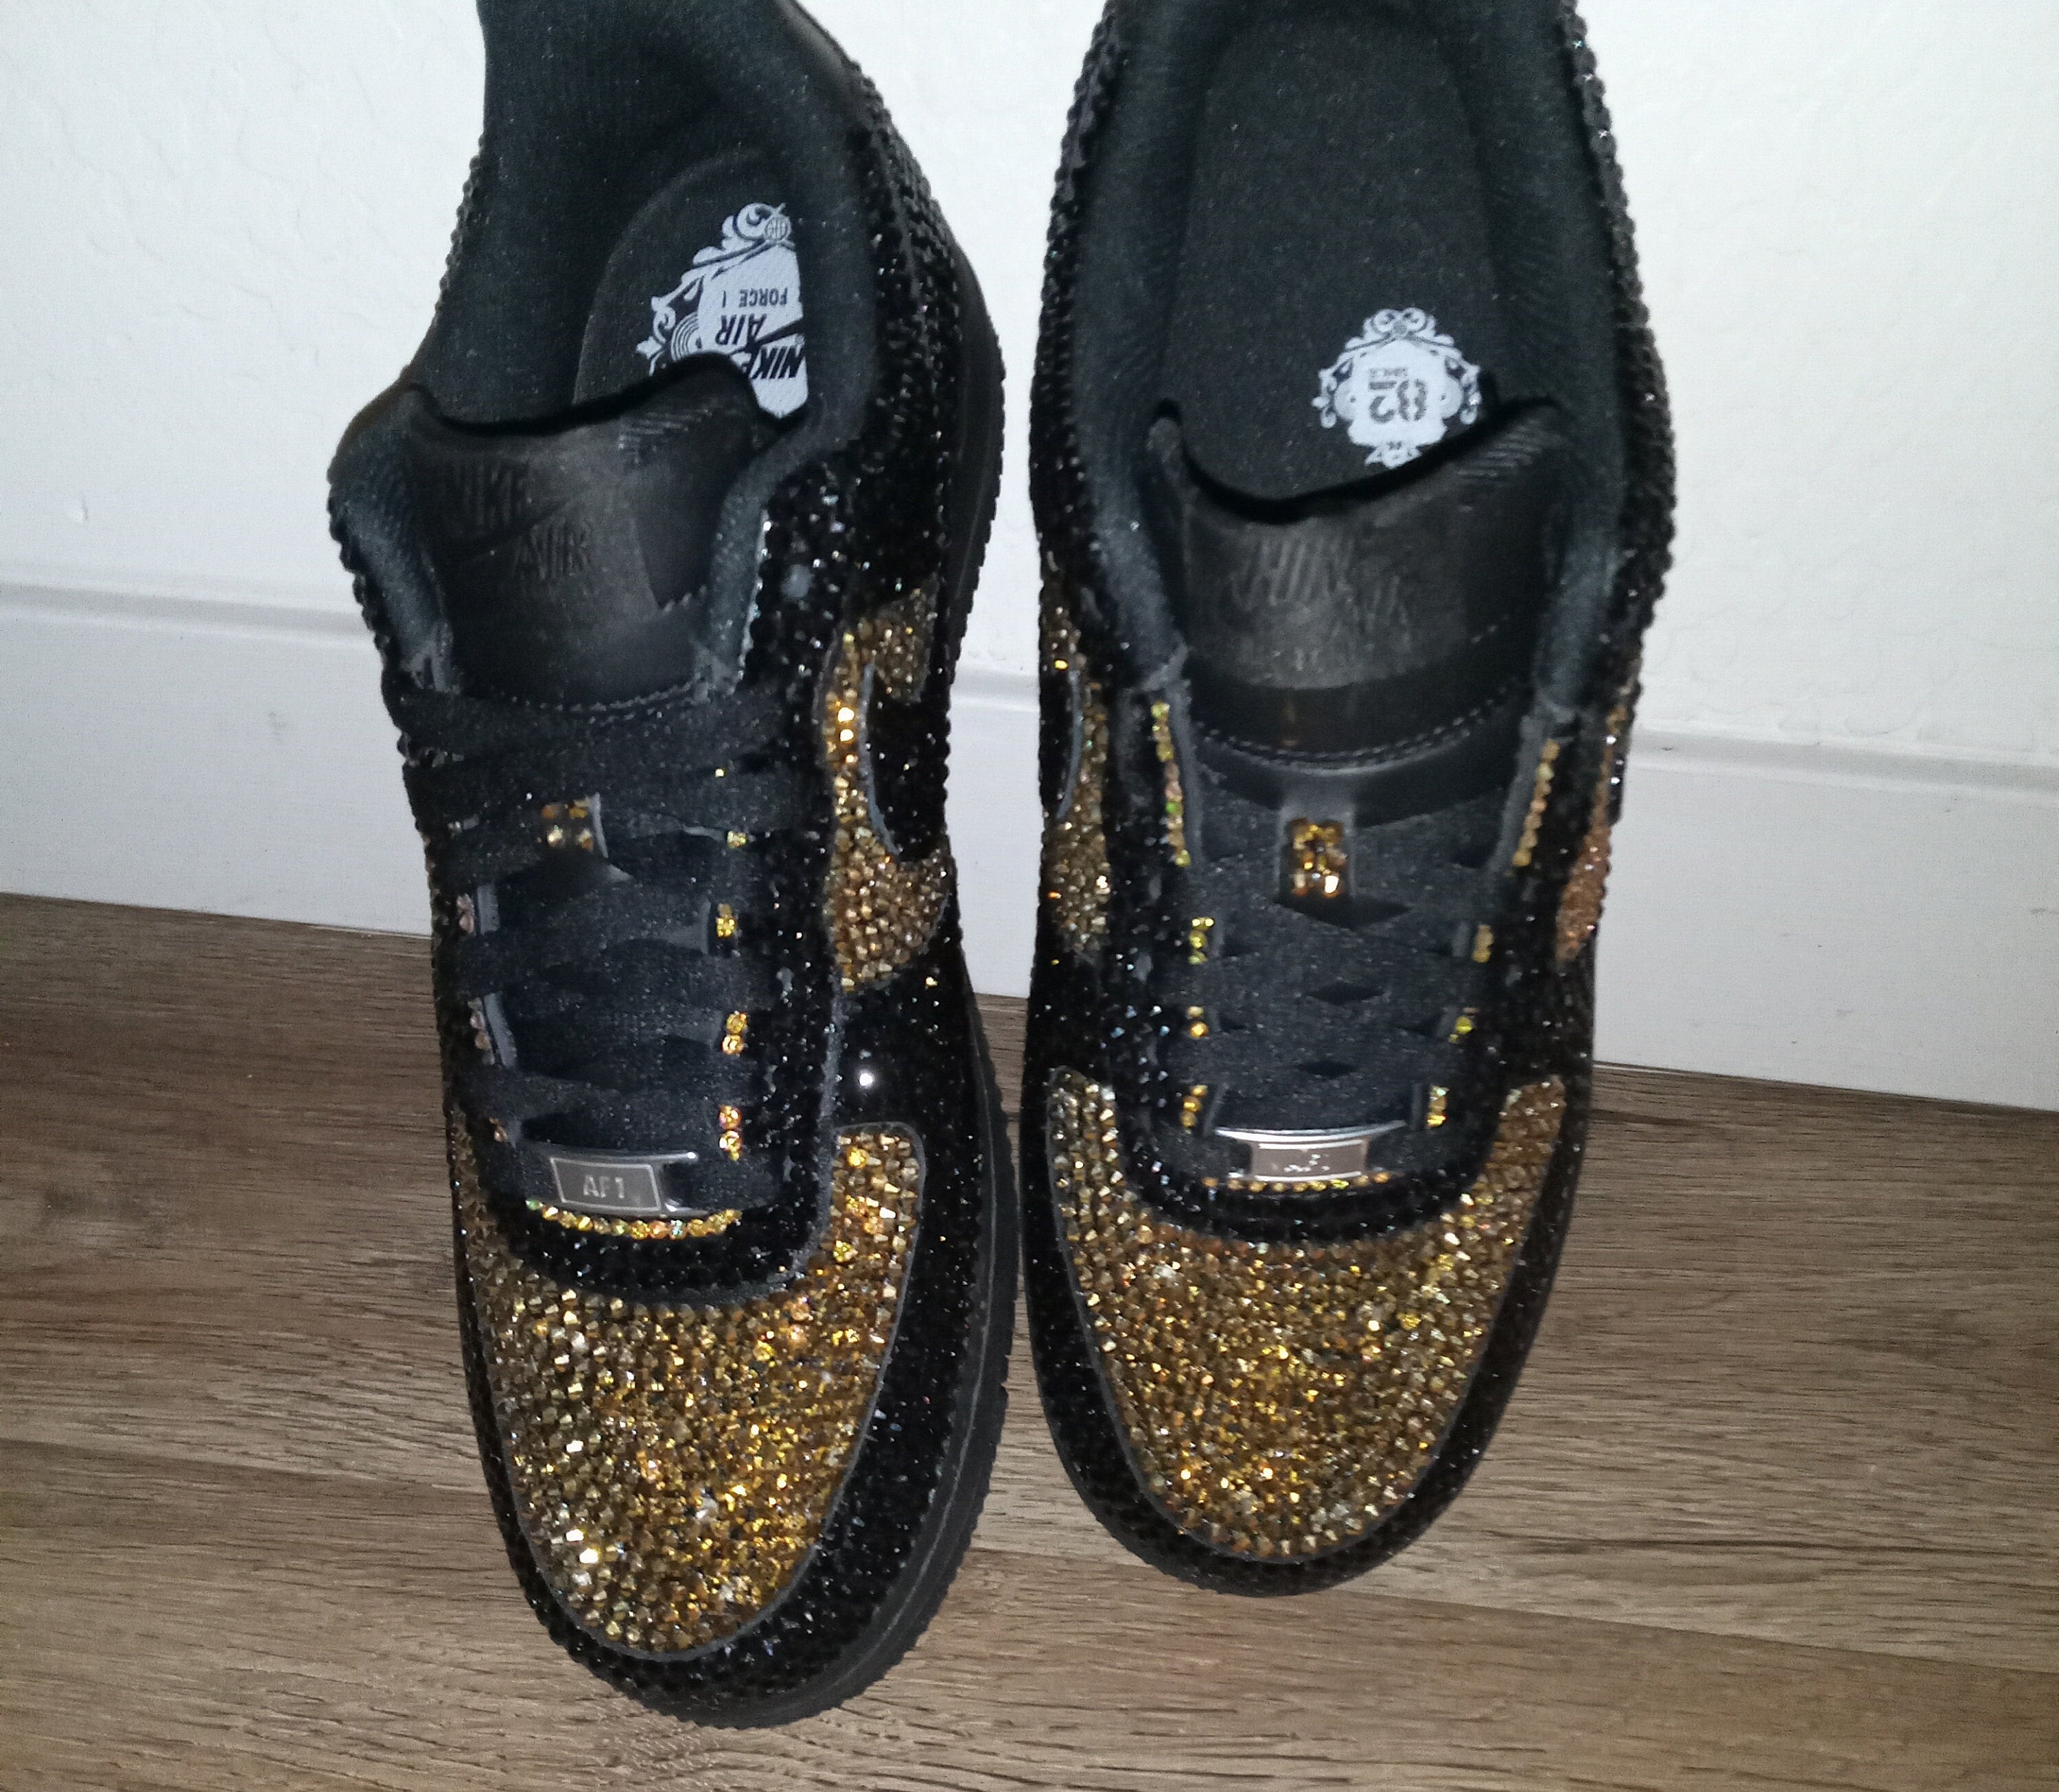 Vegas Gold Glitter Sneakers for Birthday, Special Occasion, Quinceanera, Bachelorette Party, Event, Fun Bling,Mardi Gras